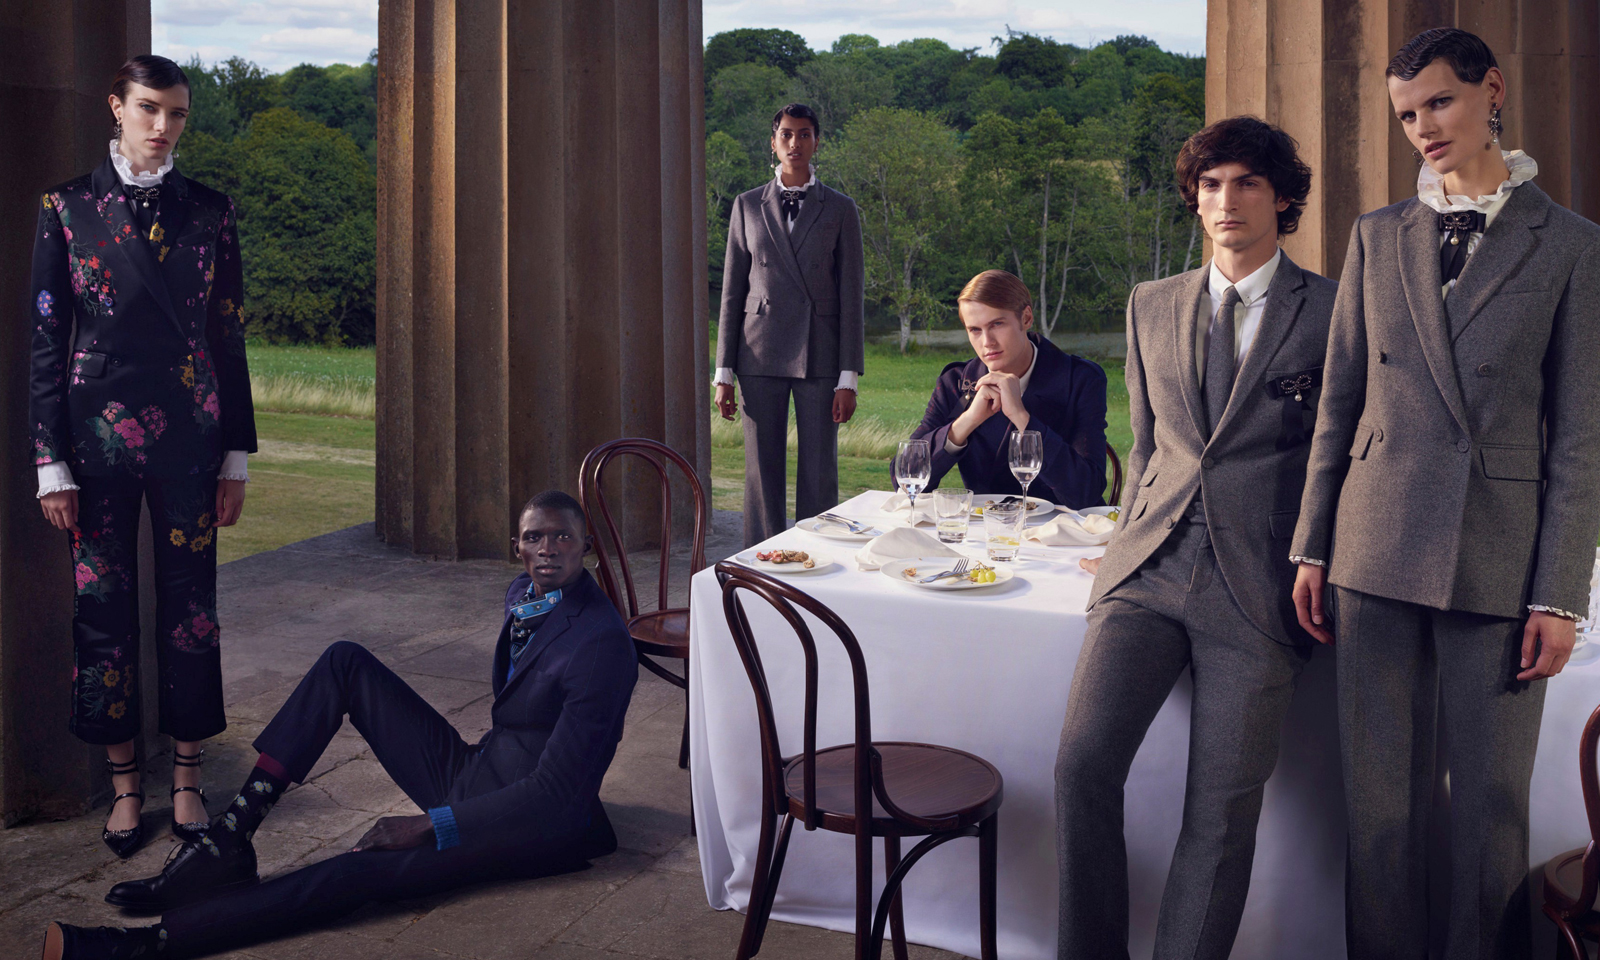 1a Family Portraits ERDEM x HM by Photographer Michal Pudelka